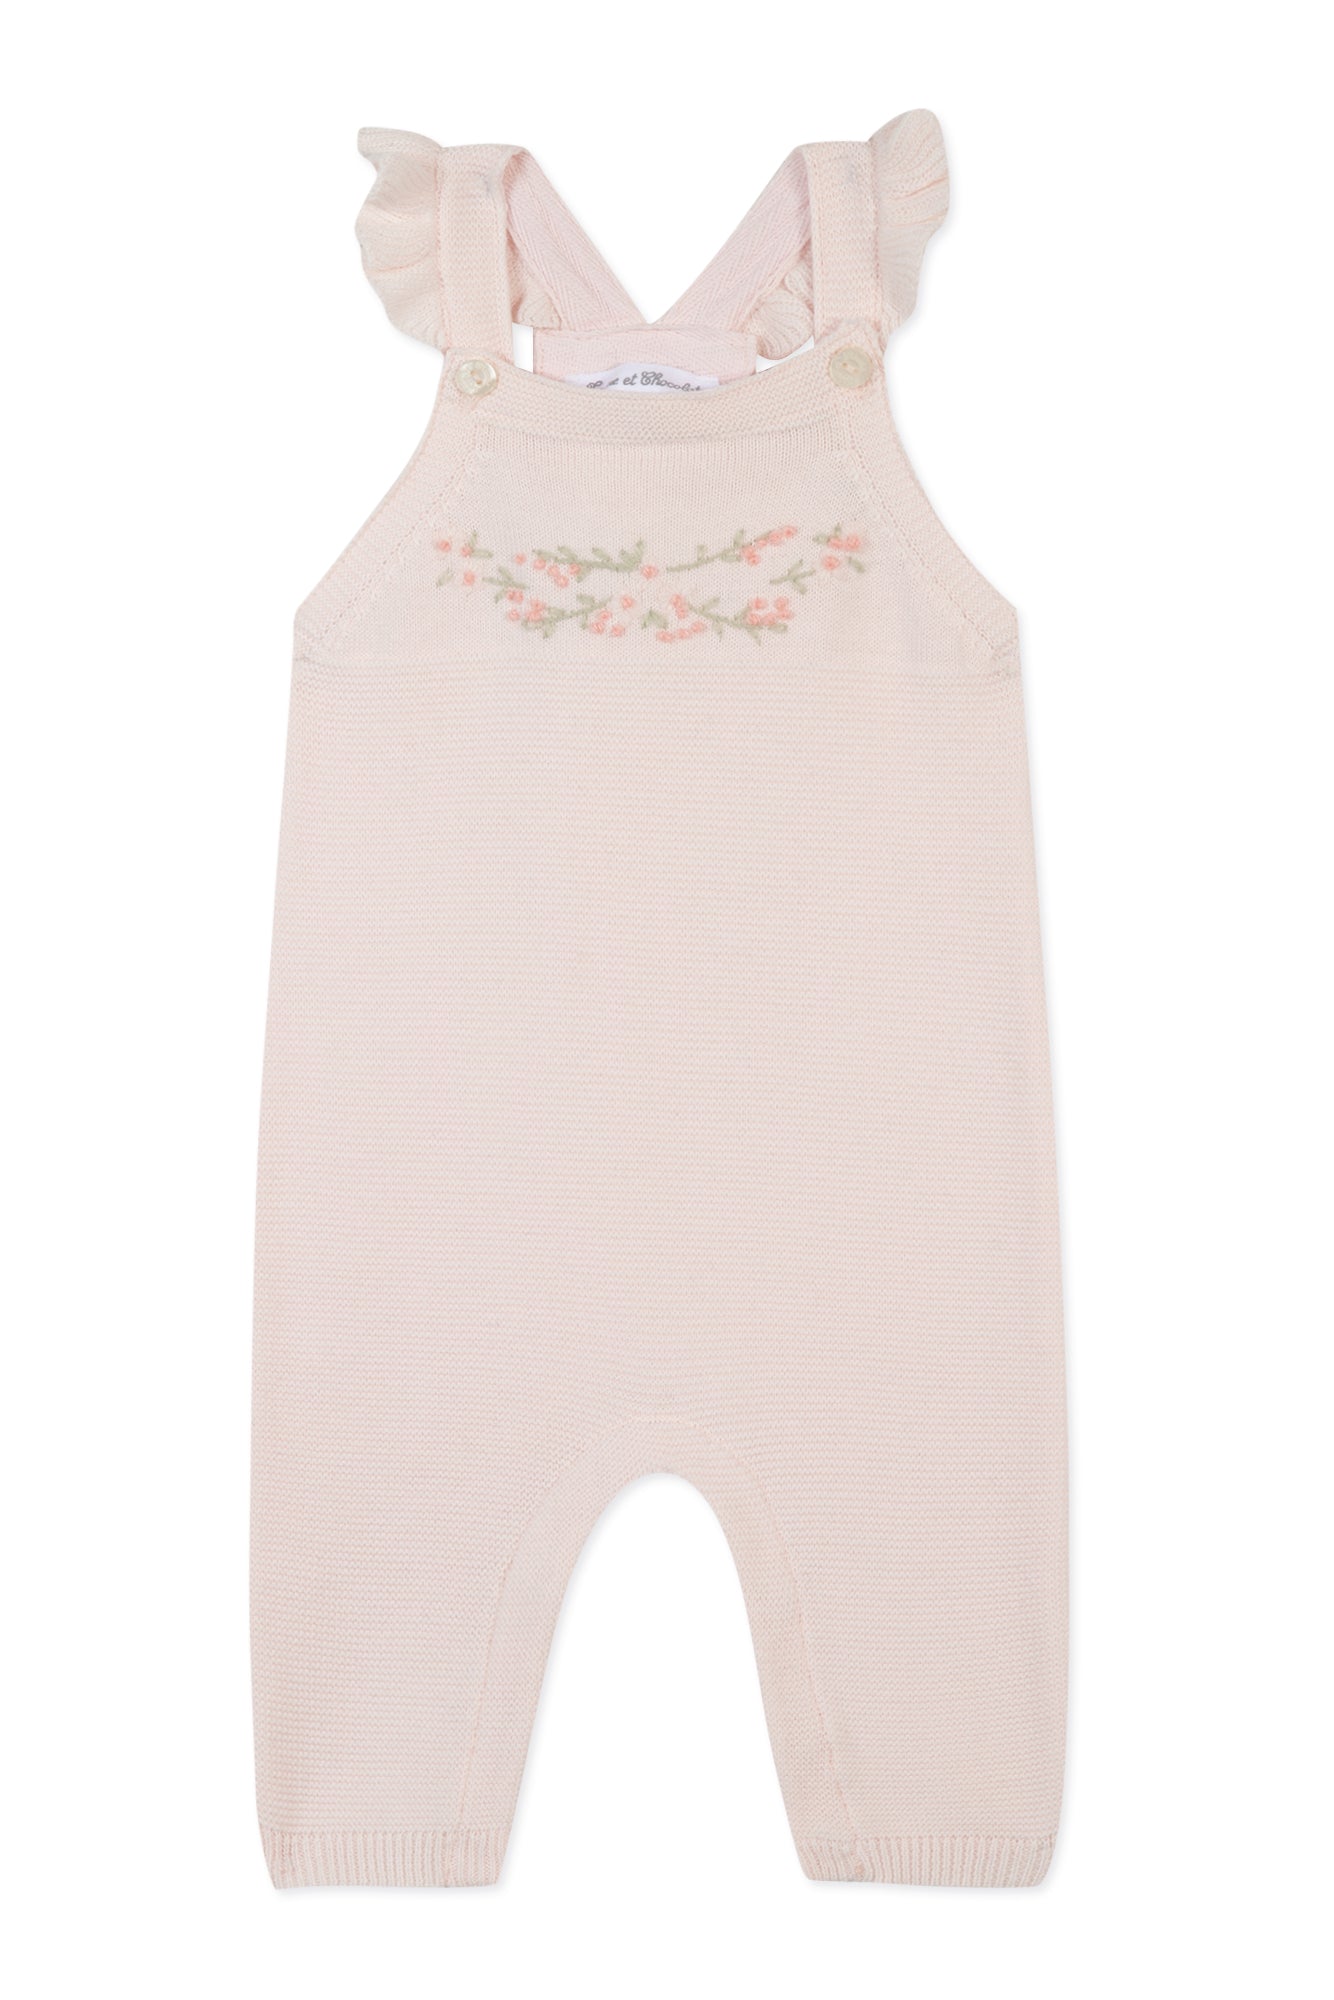 dungaree long - Pale pink Embrodery Pale Pink / 3M